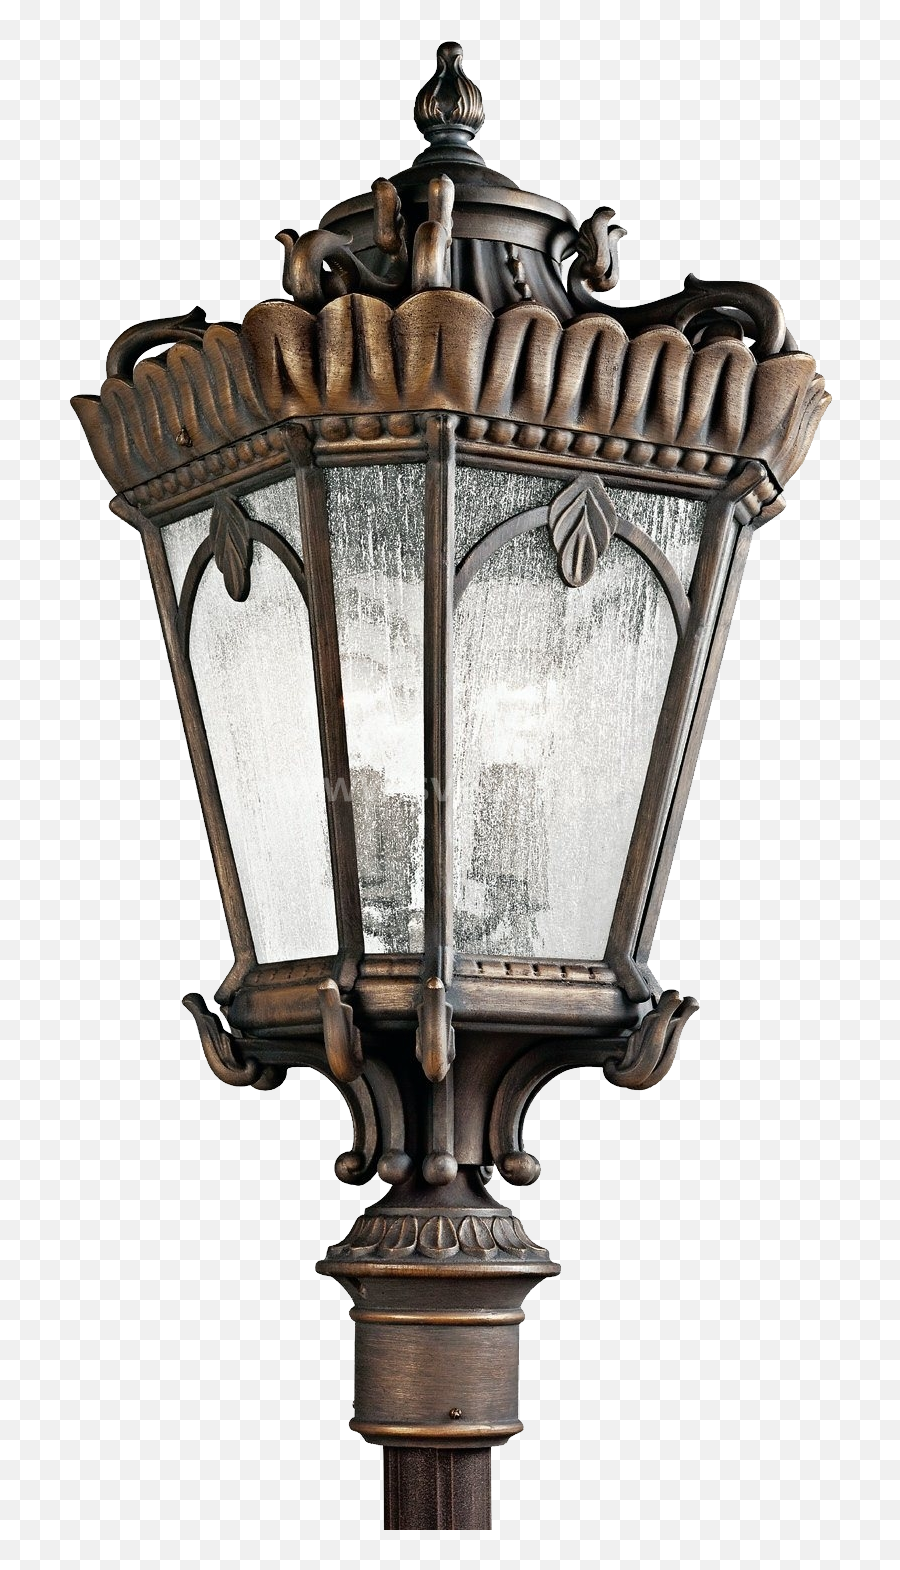 Download Street Light Png Image For Free - Street Light,Street Light Png